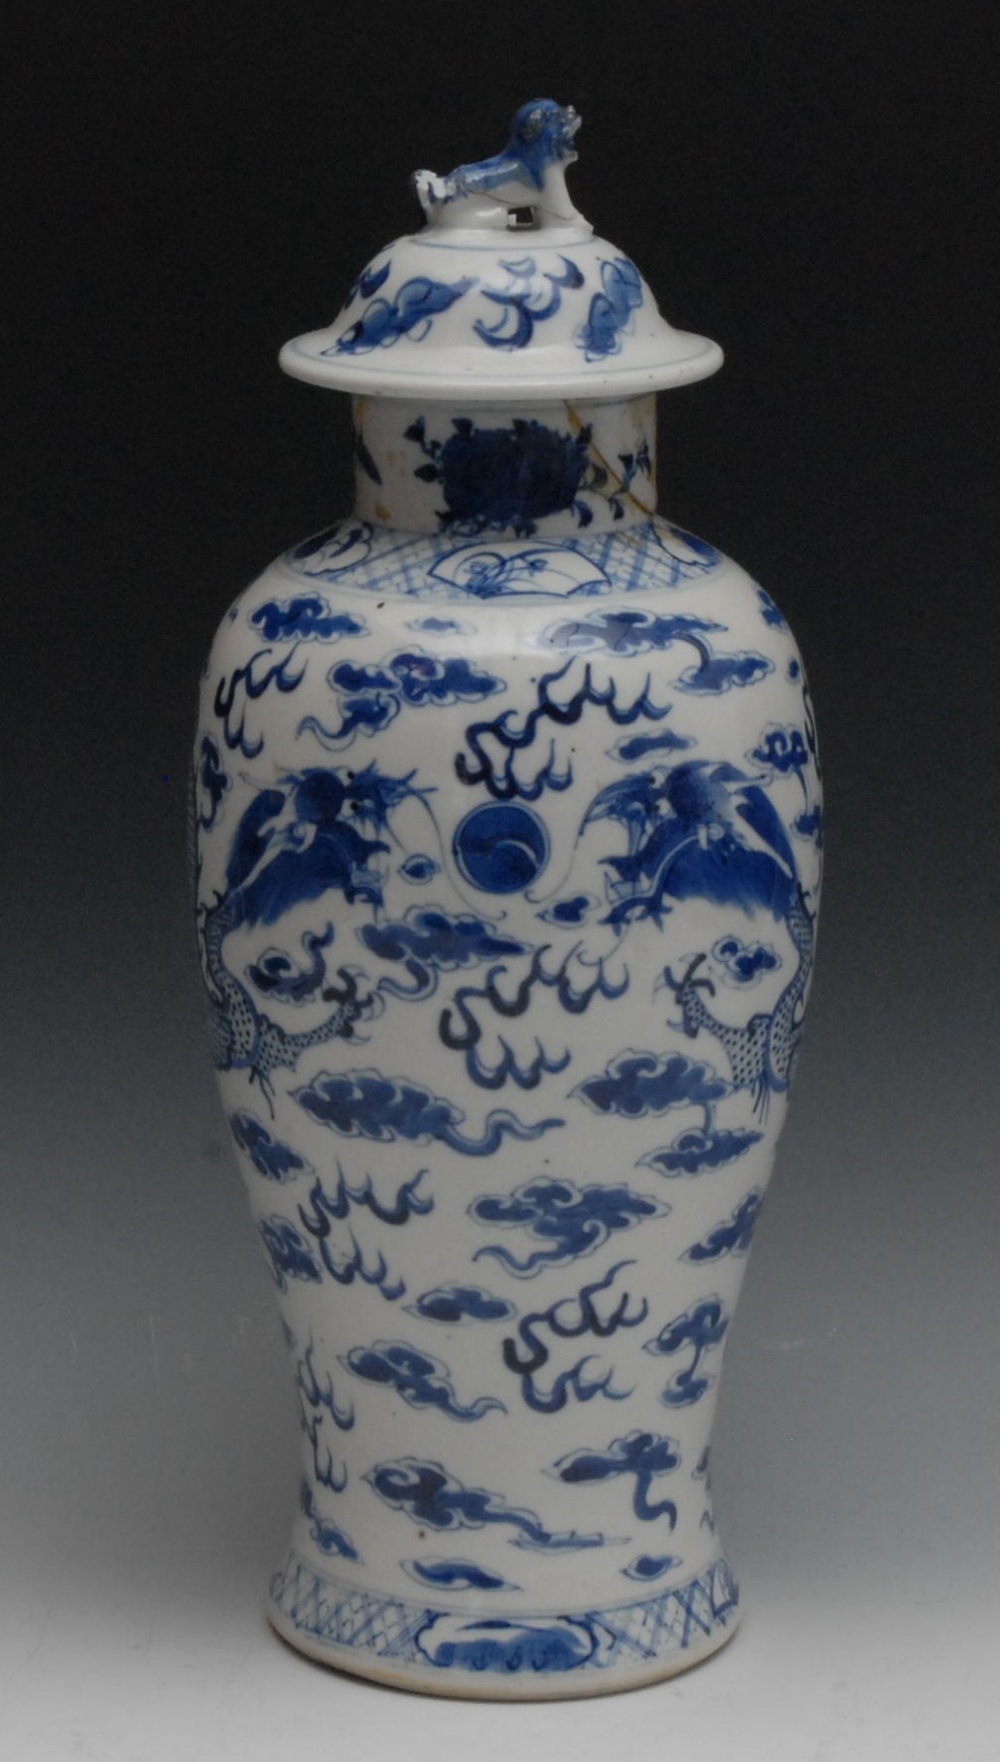 A 19th century Chinese baluster vase and cover, painted in underglaze blue with dragons chasing